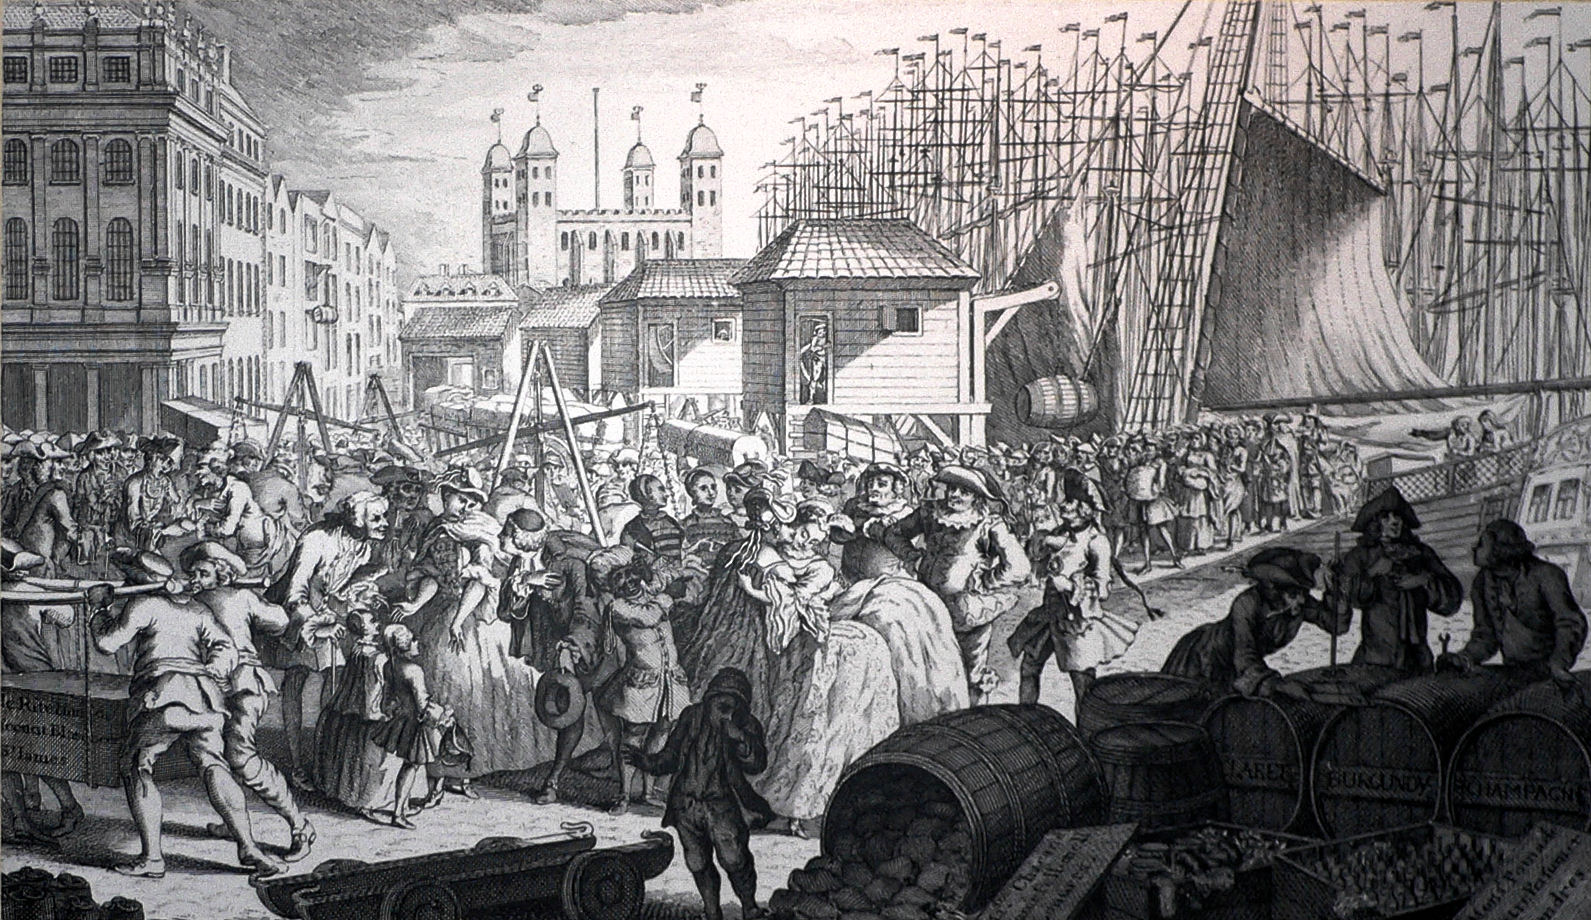 Engraving of a busy port in London. 